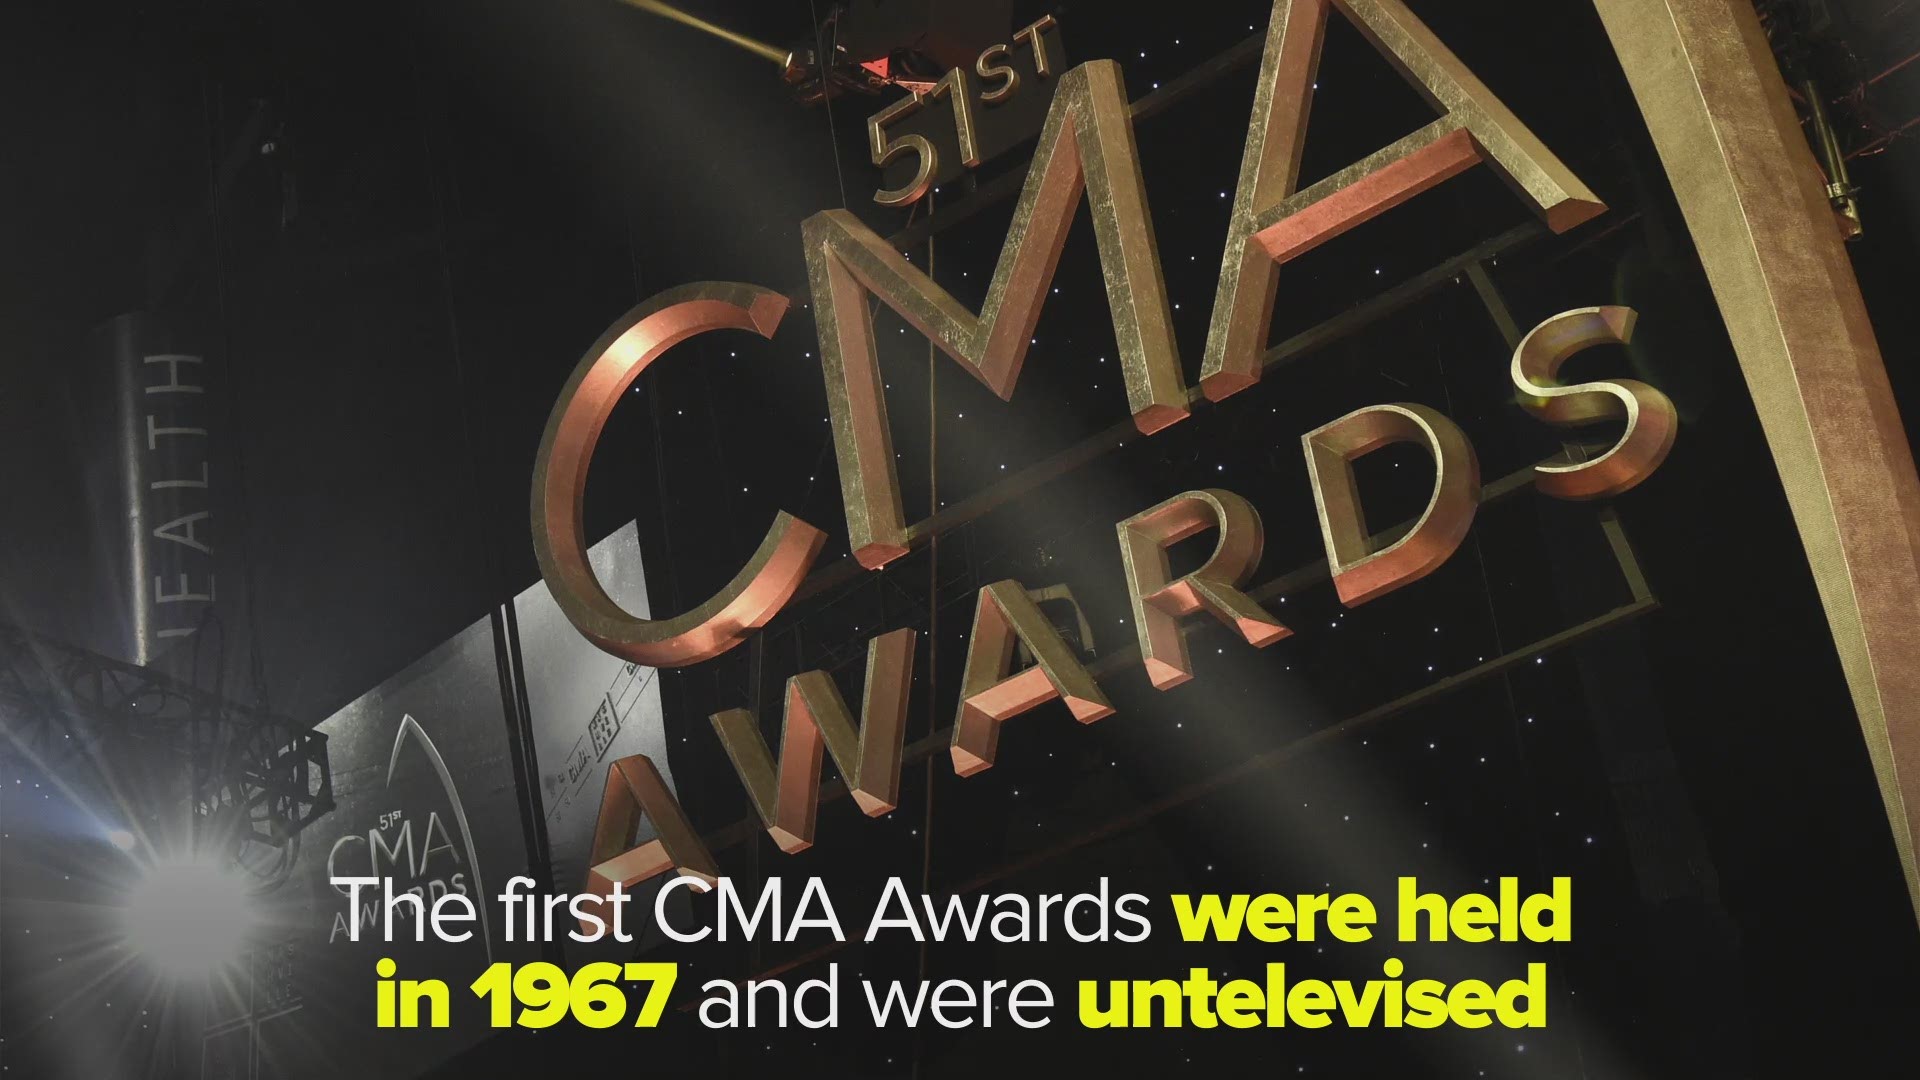 With the CMA Awards right around the corner, these 10 fun facts will get you excited for this year's show.